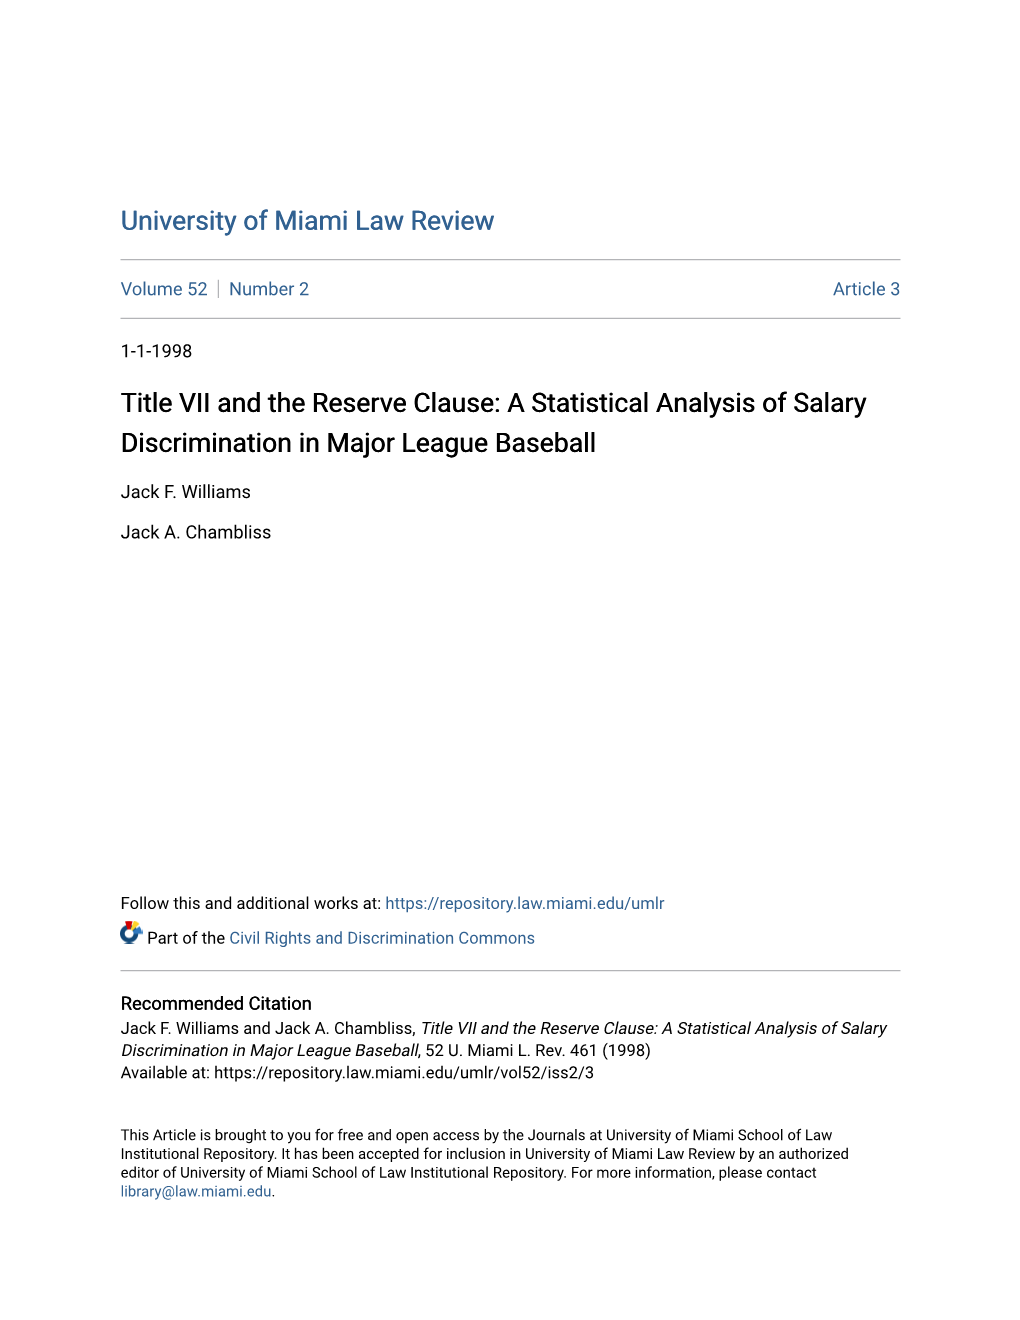 Title VII and the Reserve Clause: a Statistical Analysis of Salary Discrimination in Major League Baseball